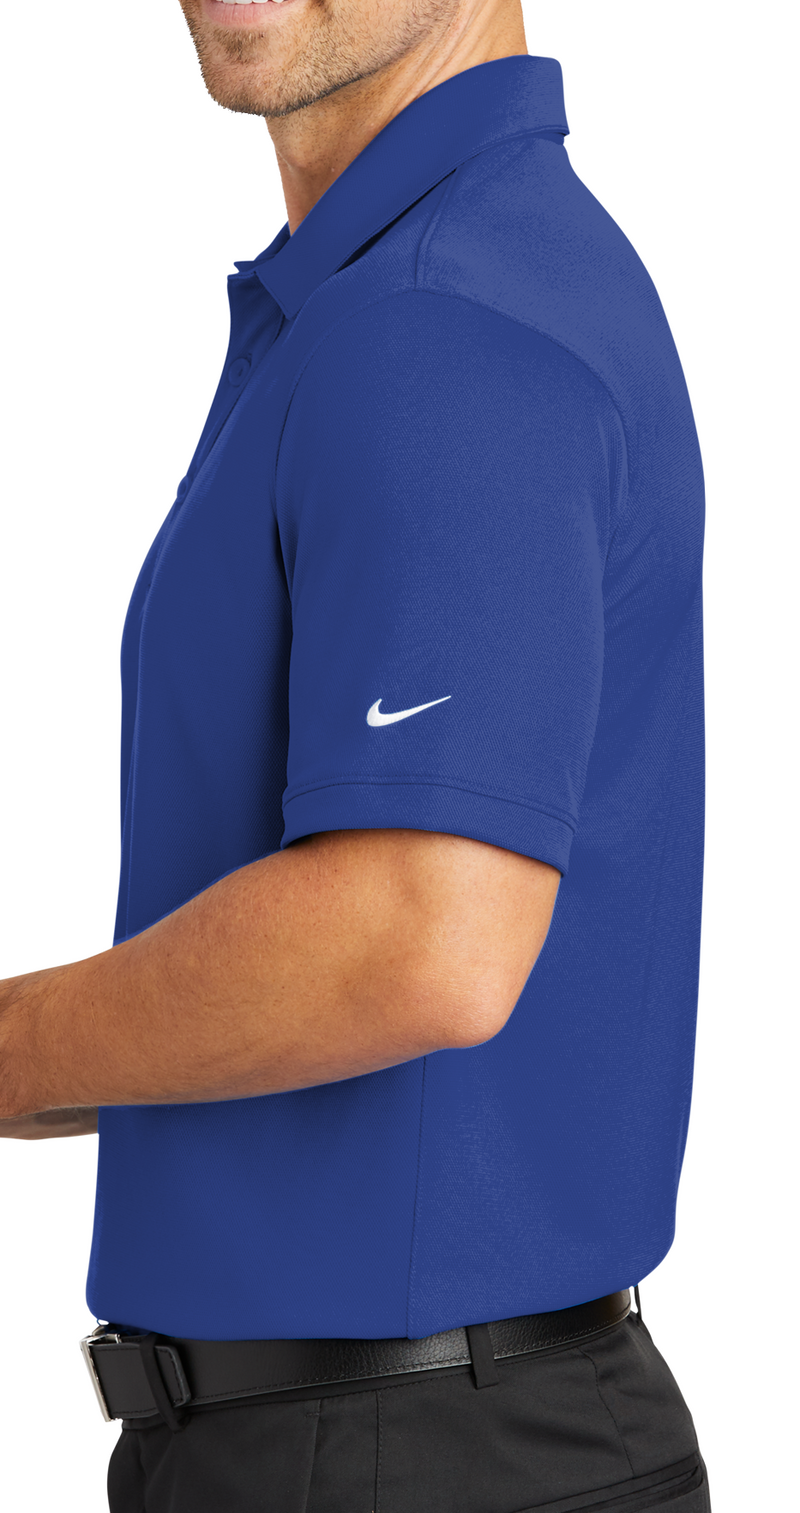 Nike [746099] Dri-FIT Solid Icon Pique Modern Fit Polo. Live Chat For Bulk Discounts.